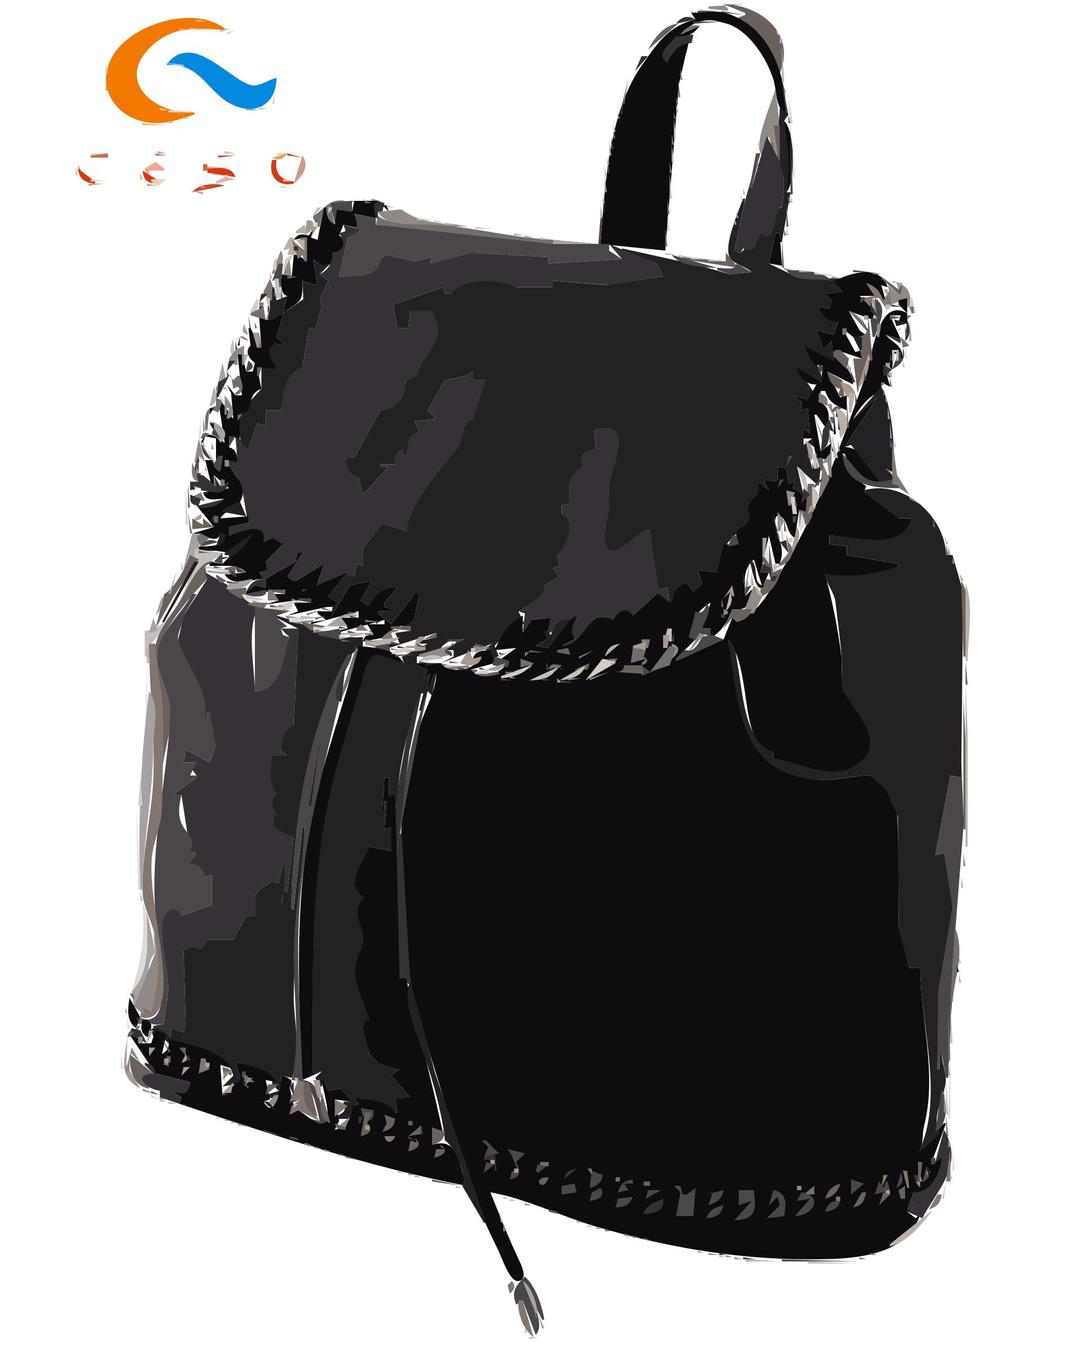 Black Leather Backpack with Logo png transparent